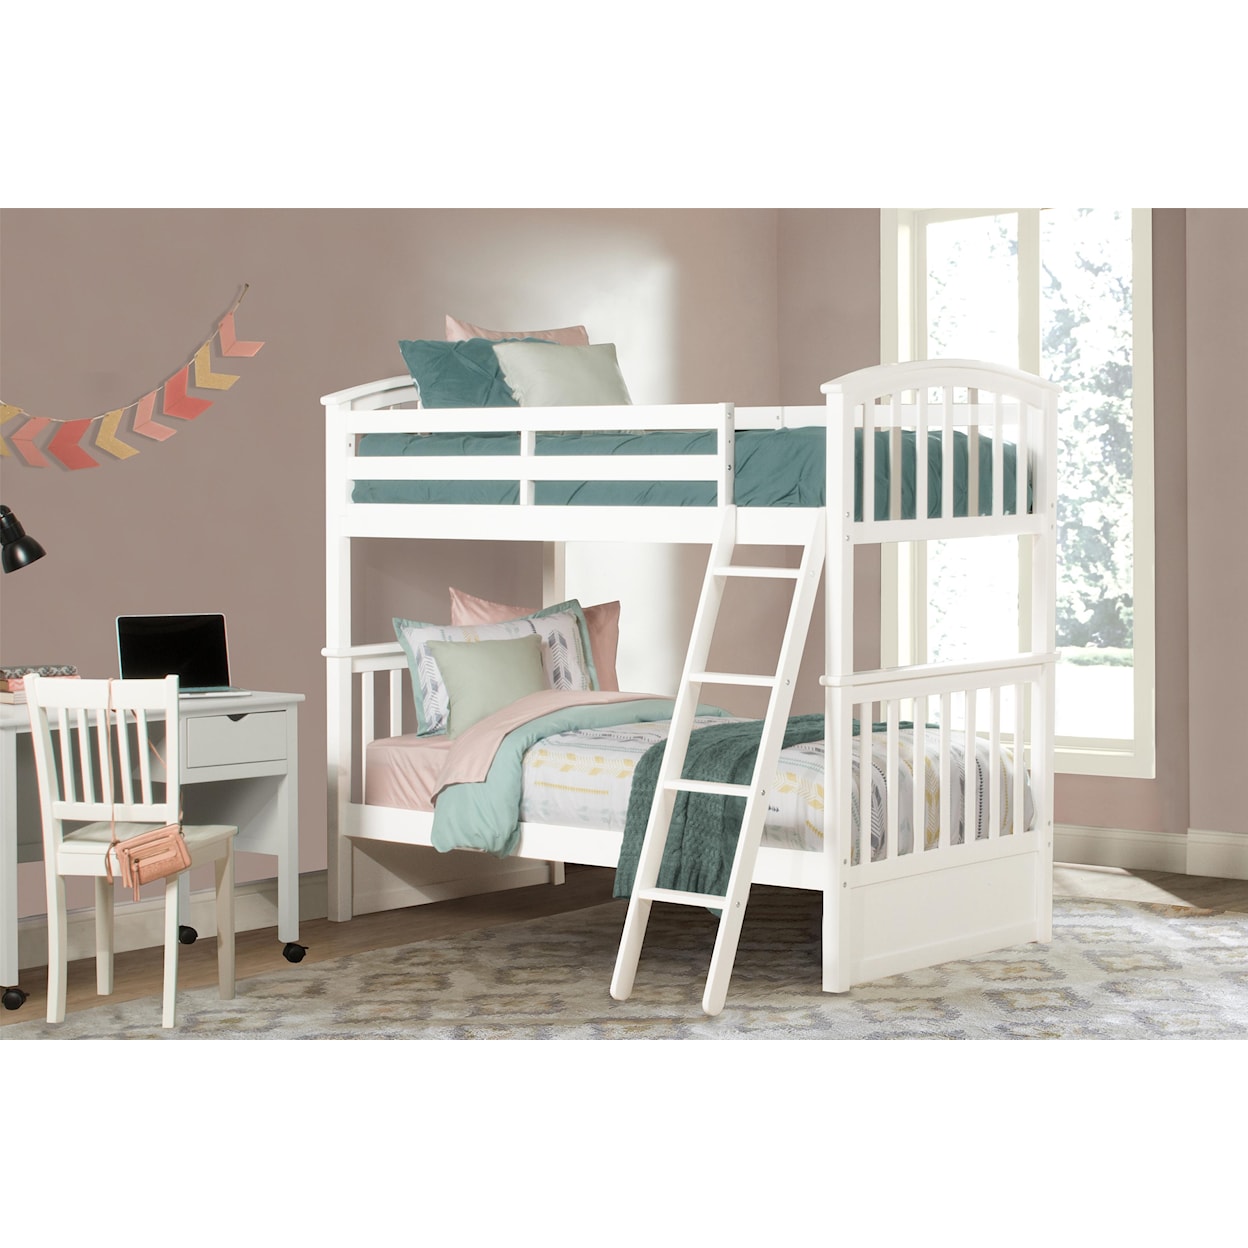 Hillsdale Schoolhouse Twin Bunk Bed